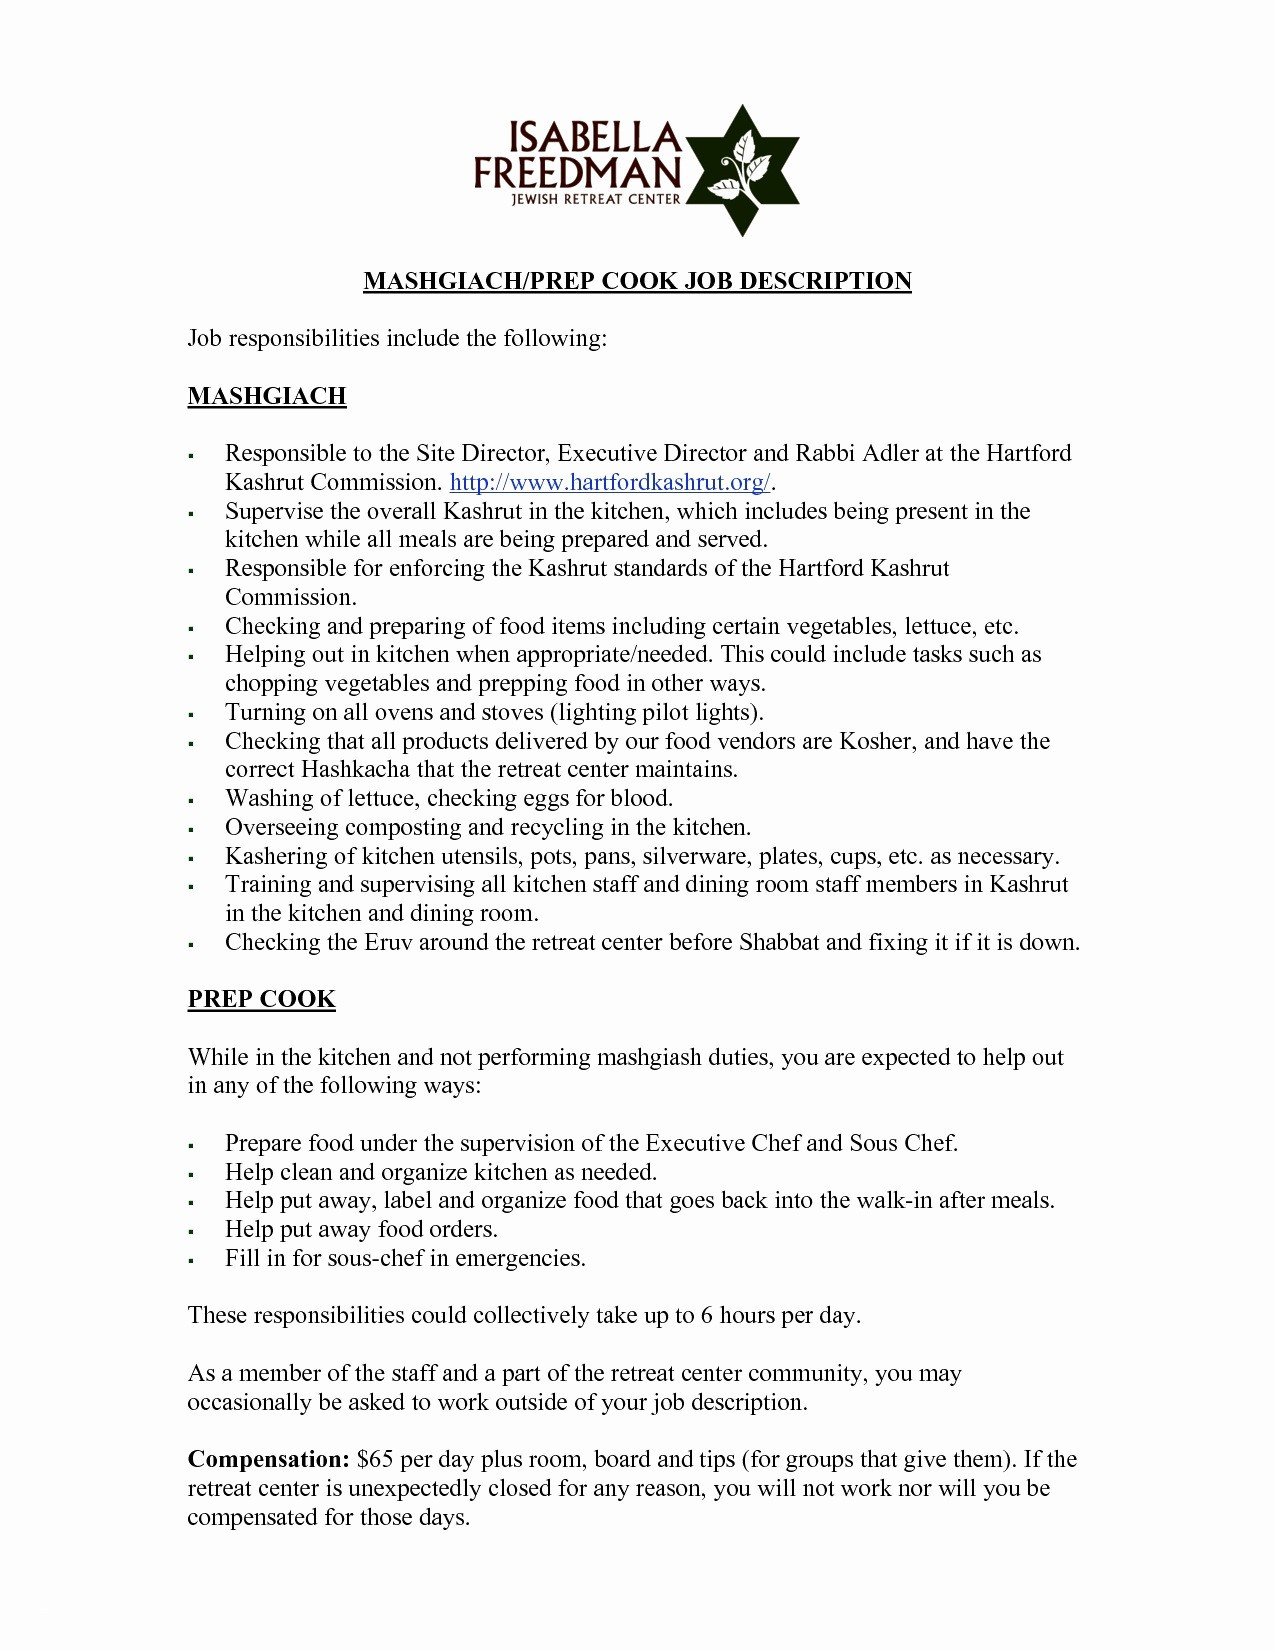 Legal Covering Letter Template - Cover Letter Job Sample Fresh Resume Doc Template Luxury Resume and